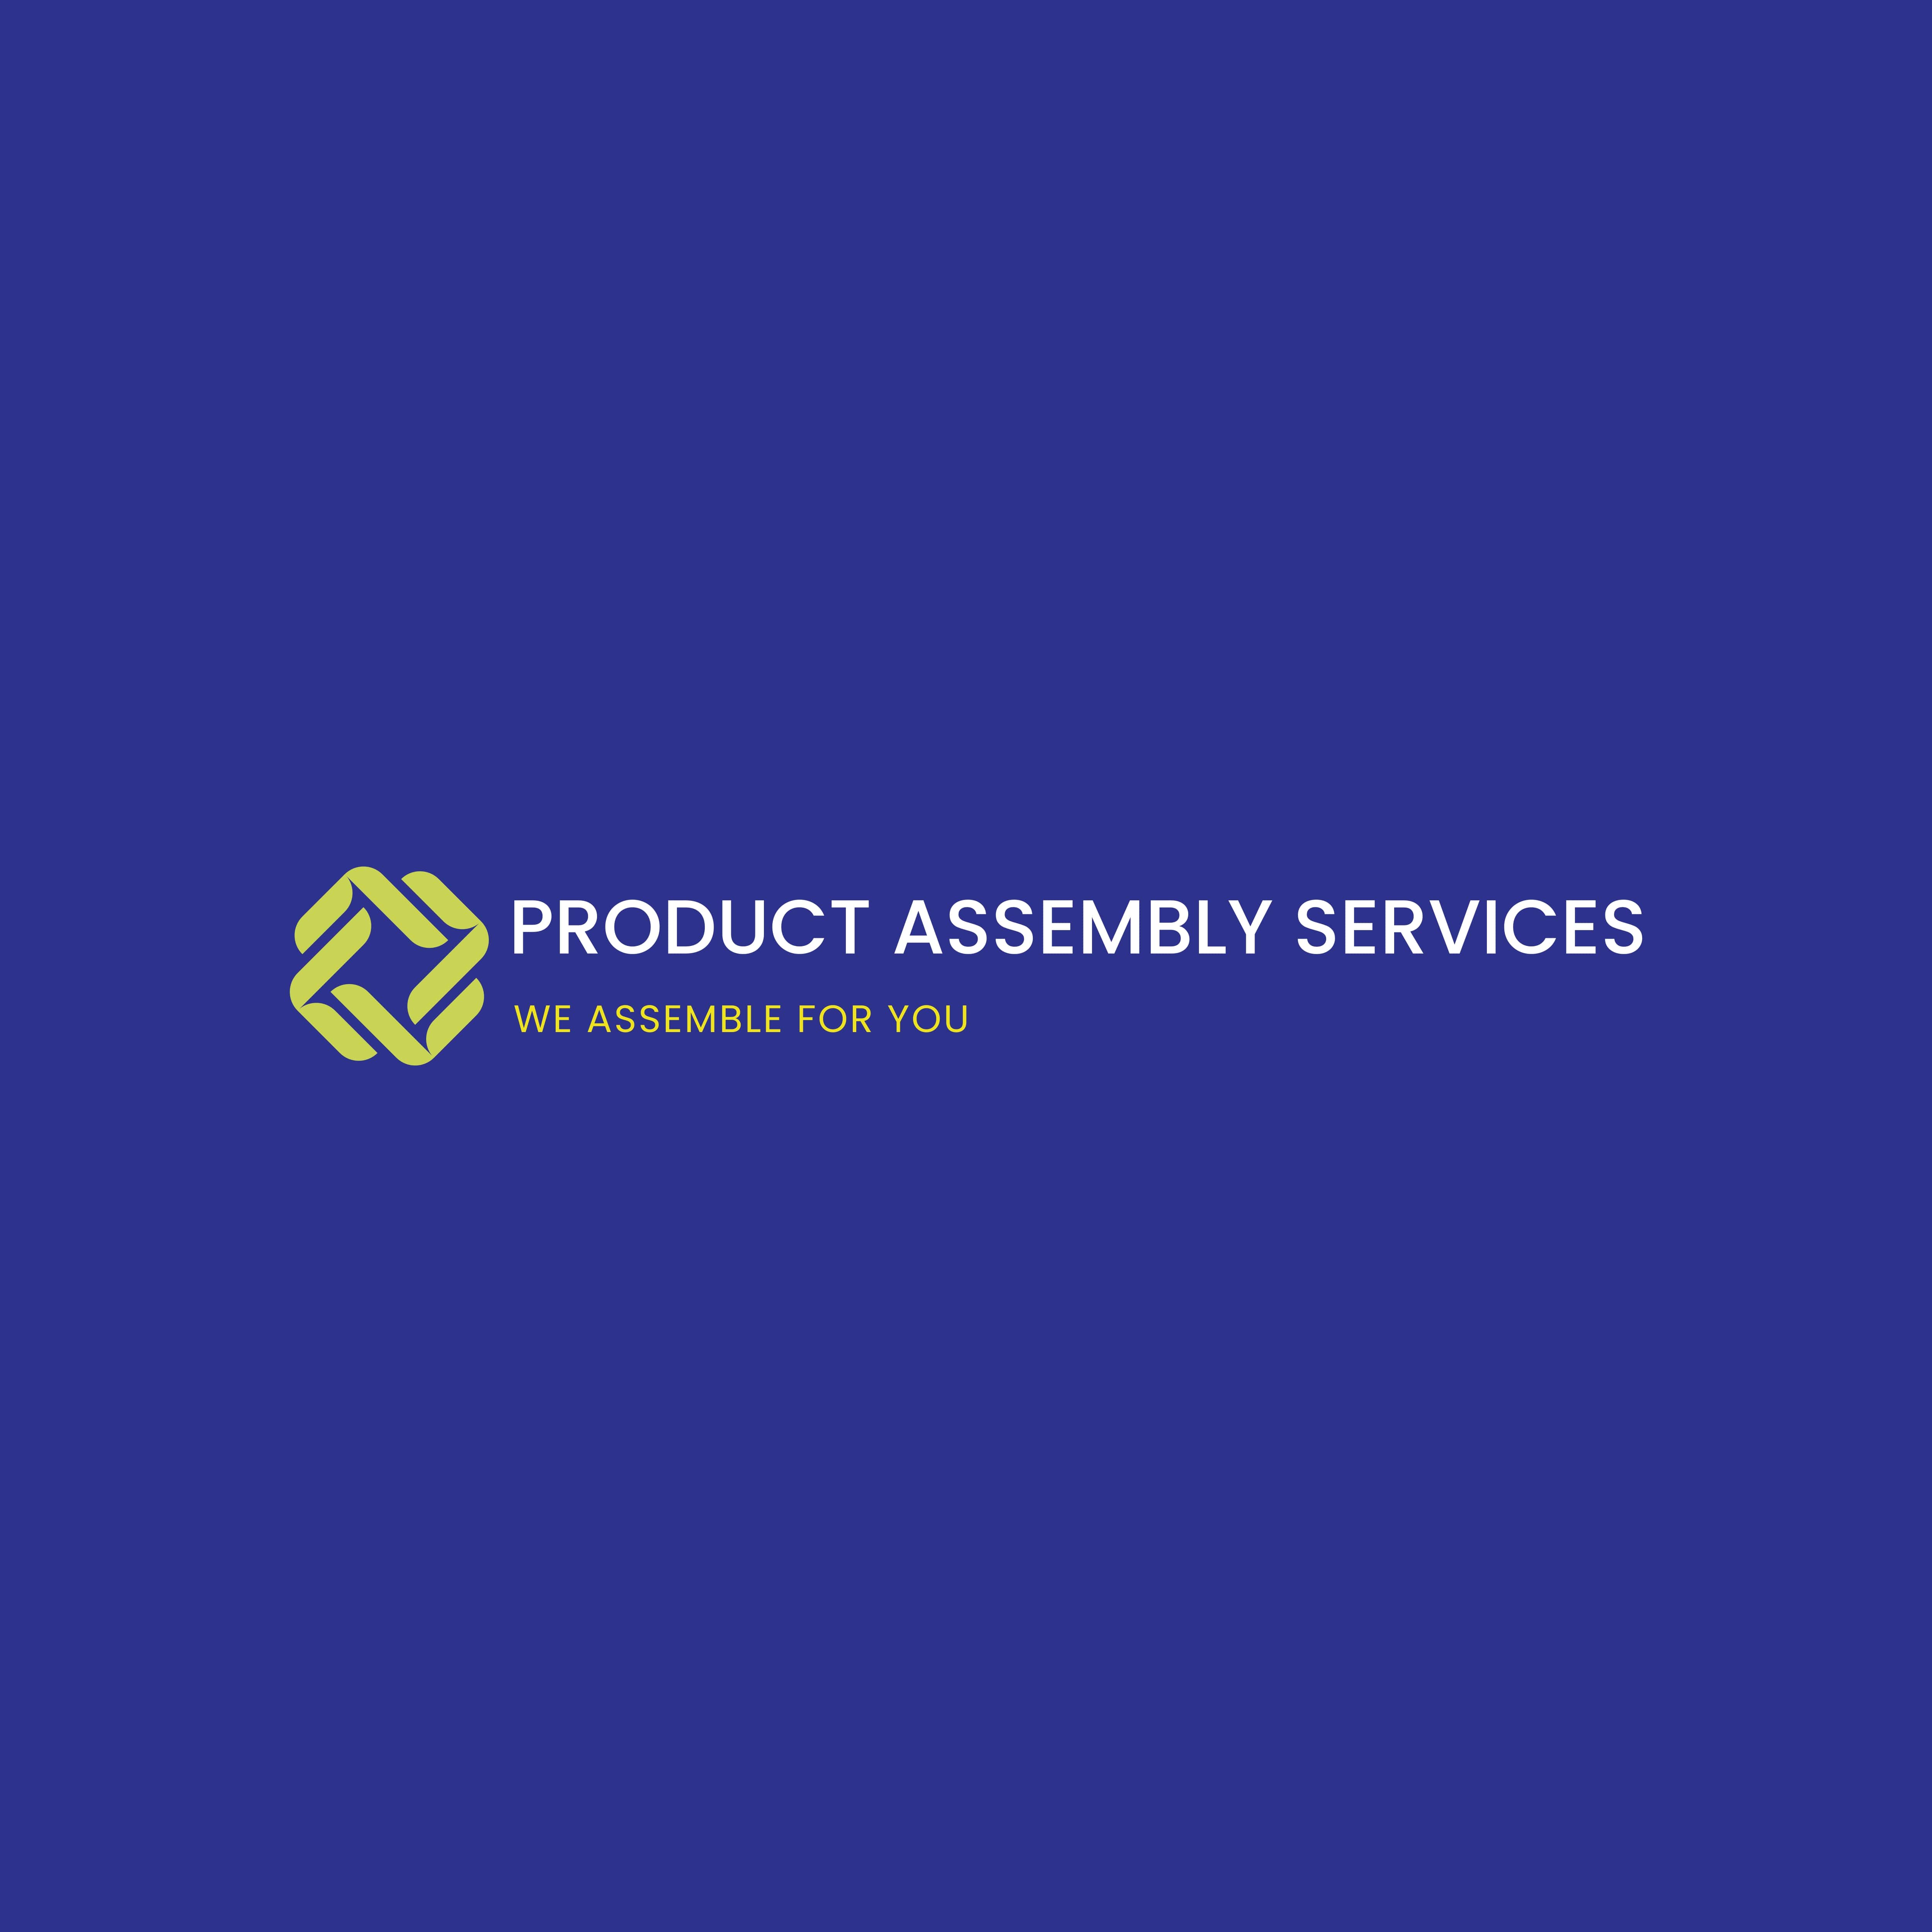 Product Assembly Services Logo